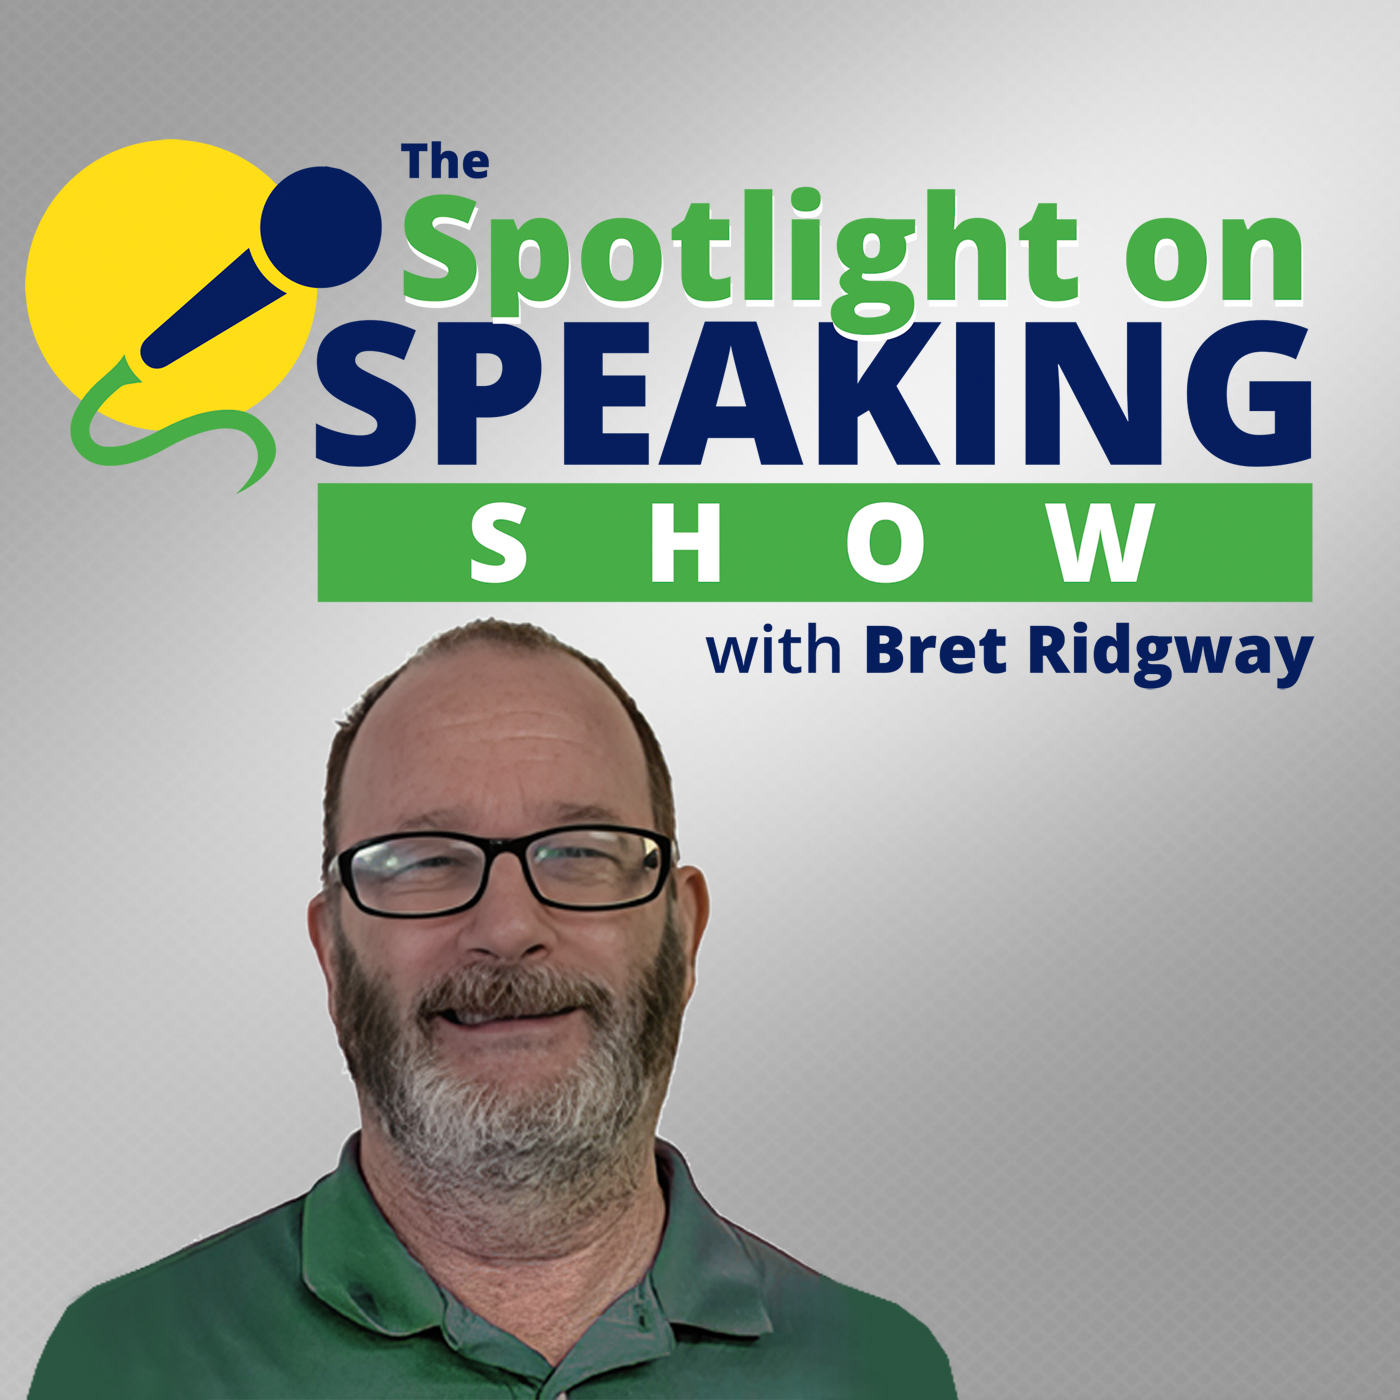 The Spotlight on Speaking Show with Bret Ridgway